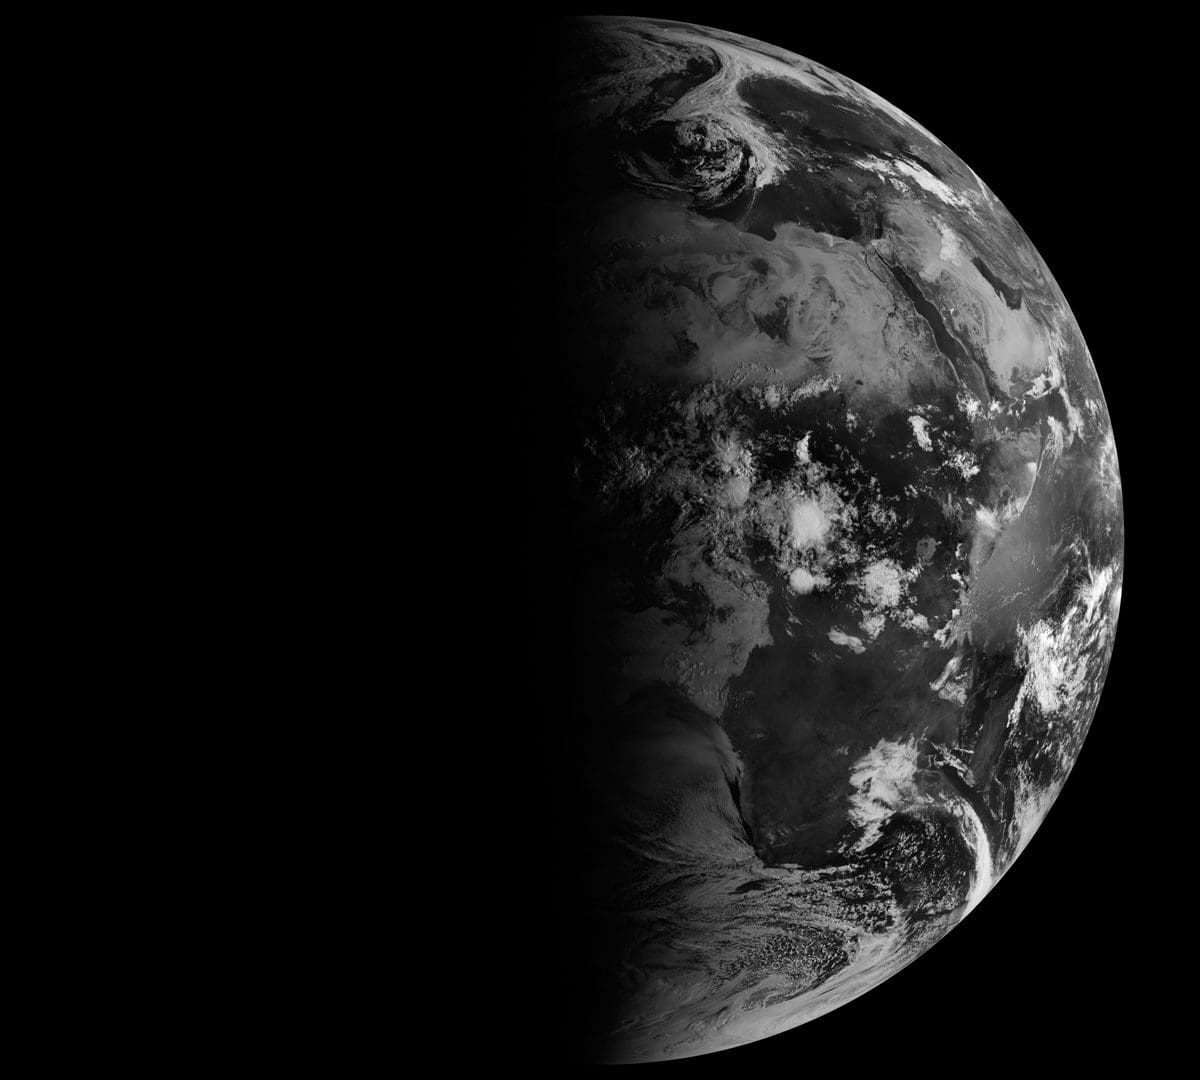 On the September equinox, the terminator is a north-south line, and the sun is said to sit directly above the equator. CREDIT: NASA's Earth Observatory